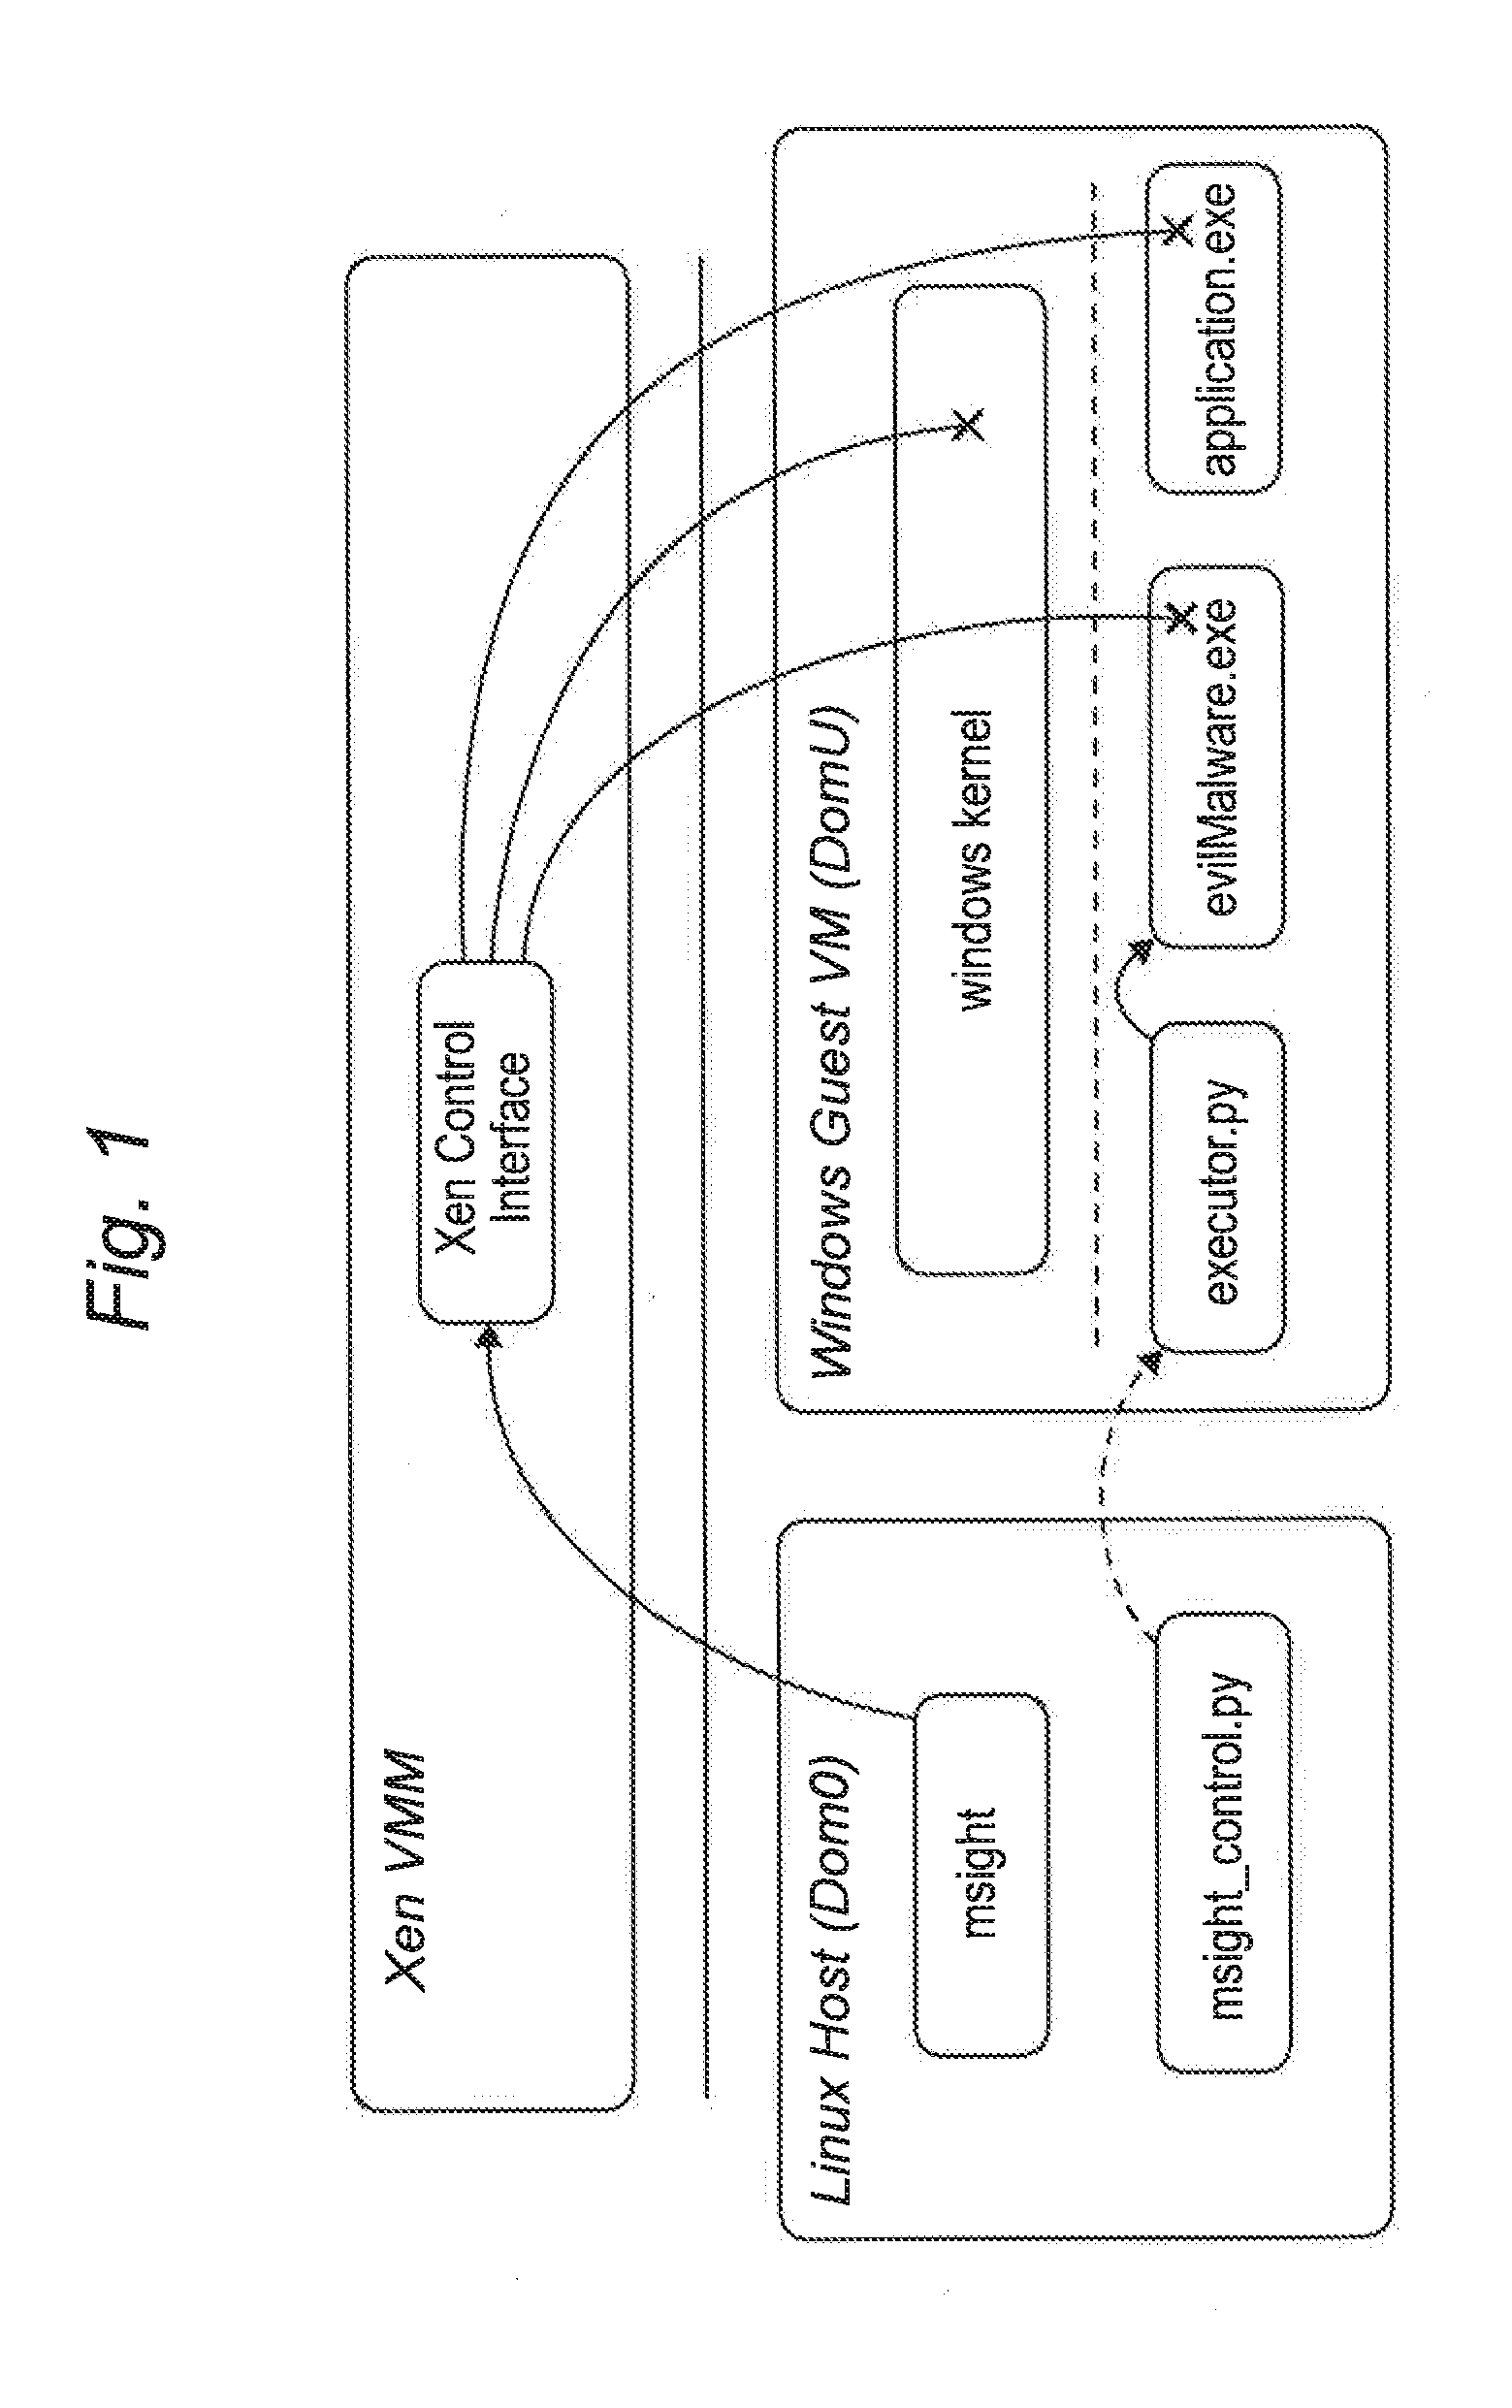 System and Method to Create a Number of Breakpoints in a Virtual Machine Via Virtual Machine Trapping Events